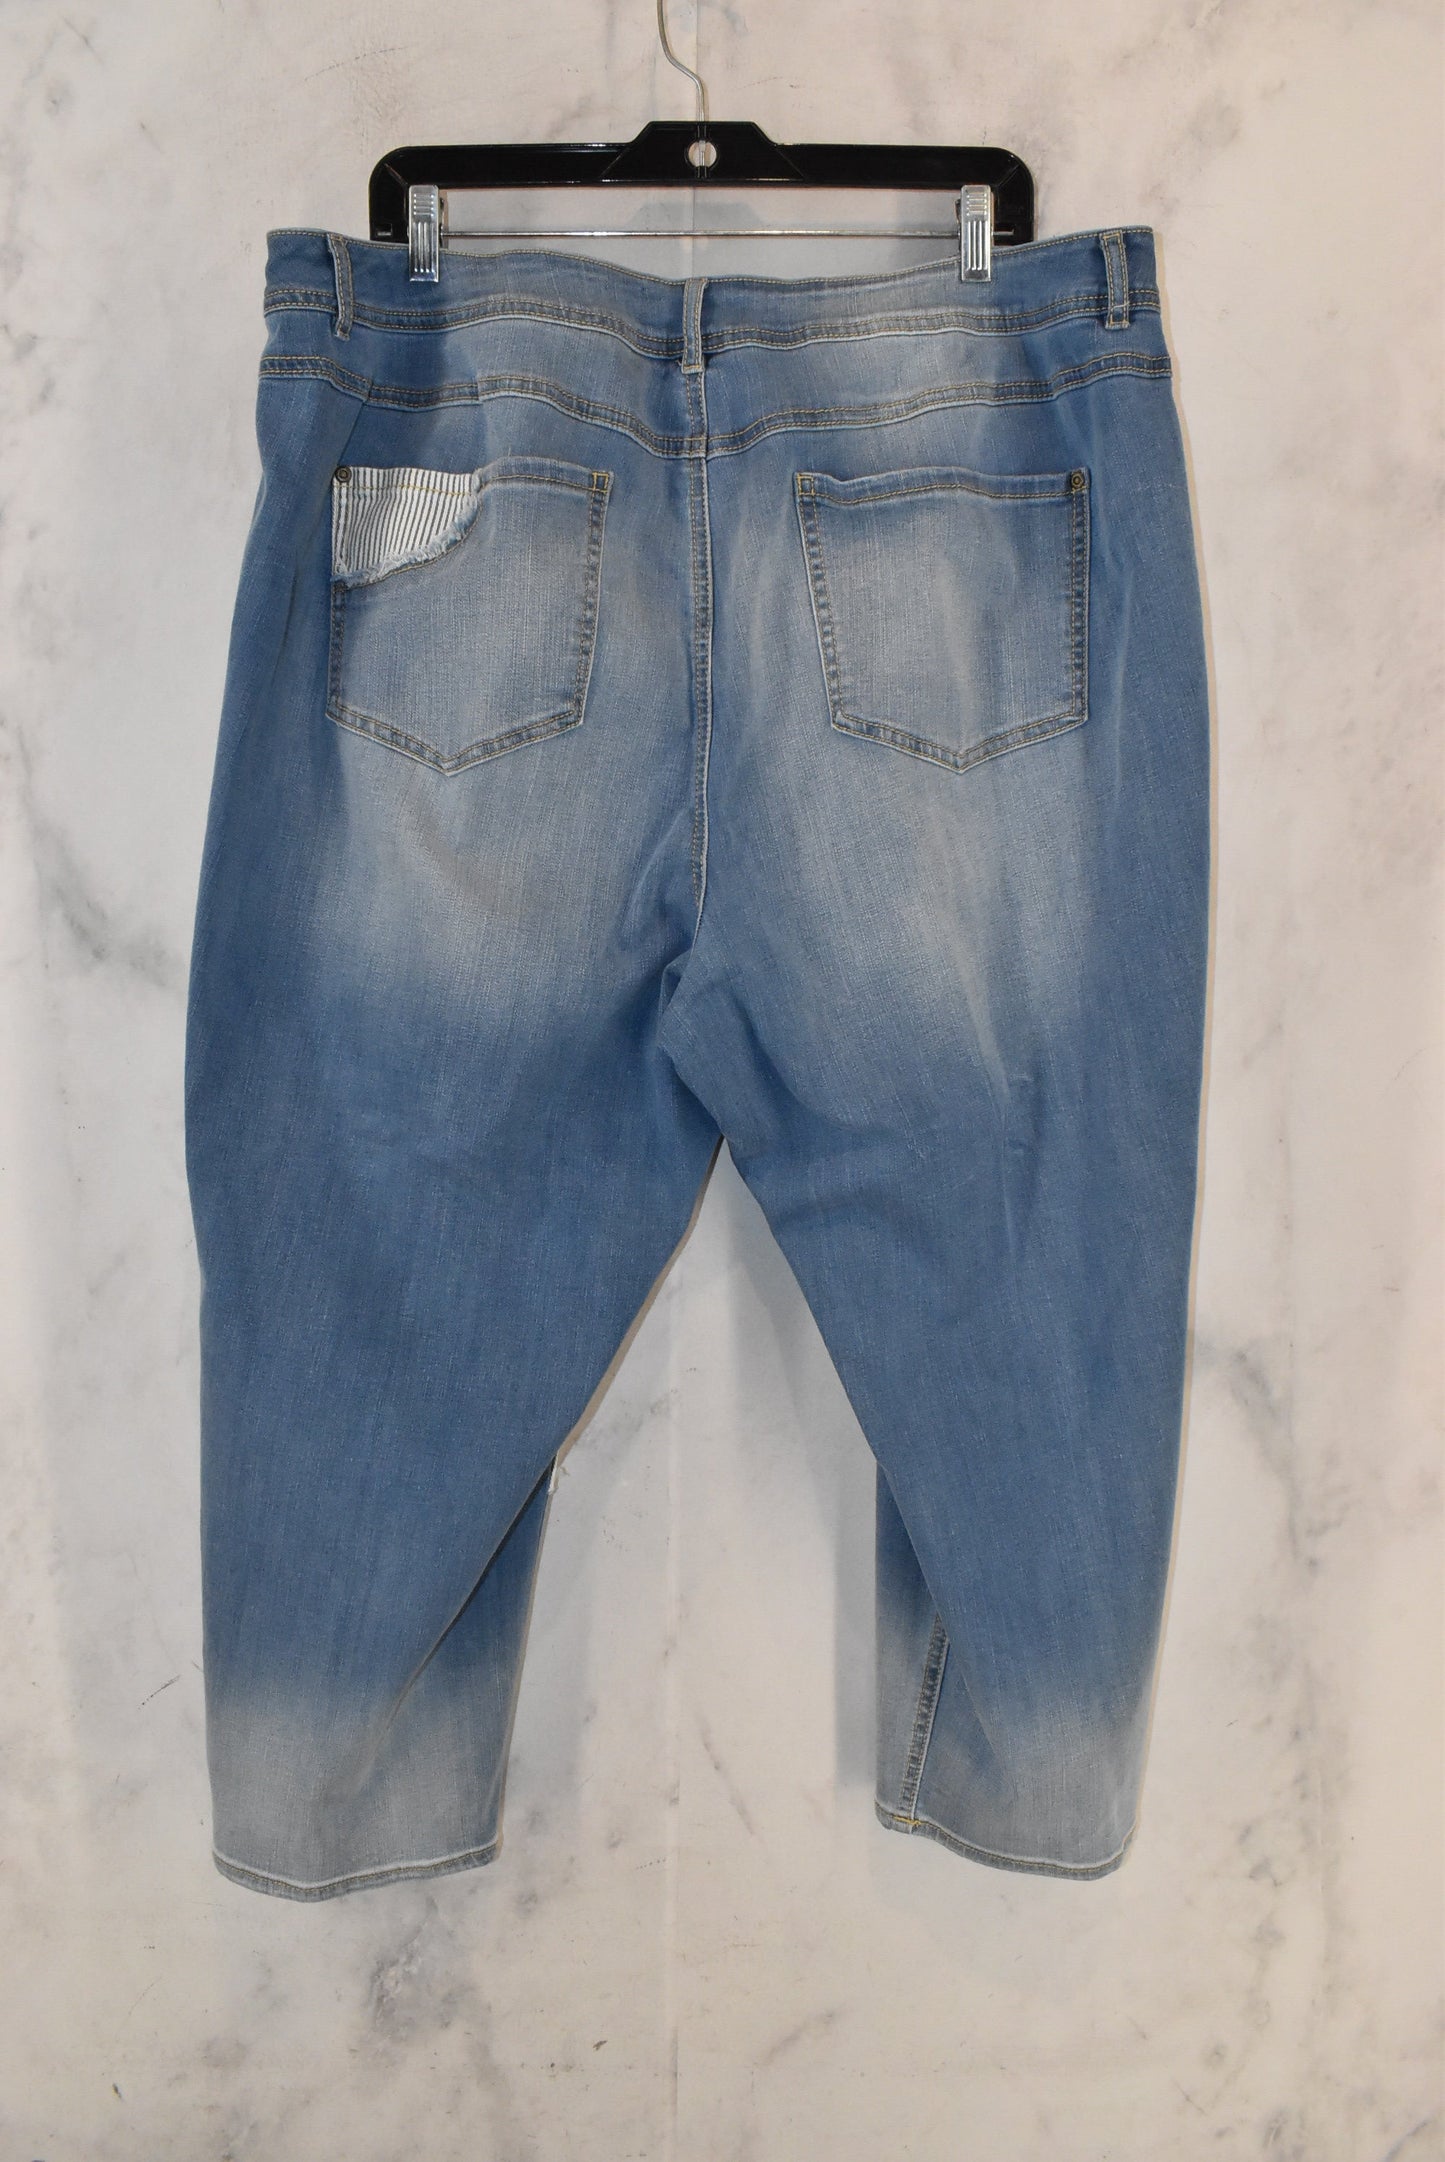 Jeans Cropped By Cato  Size: 24